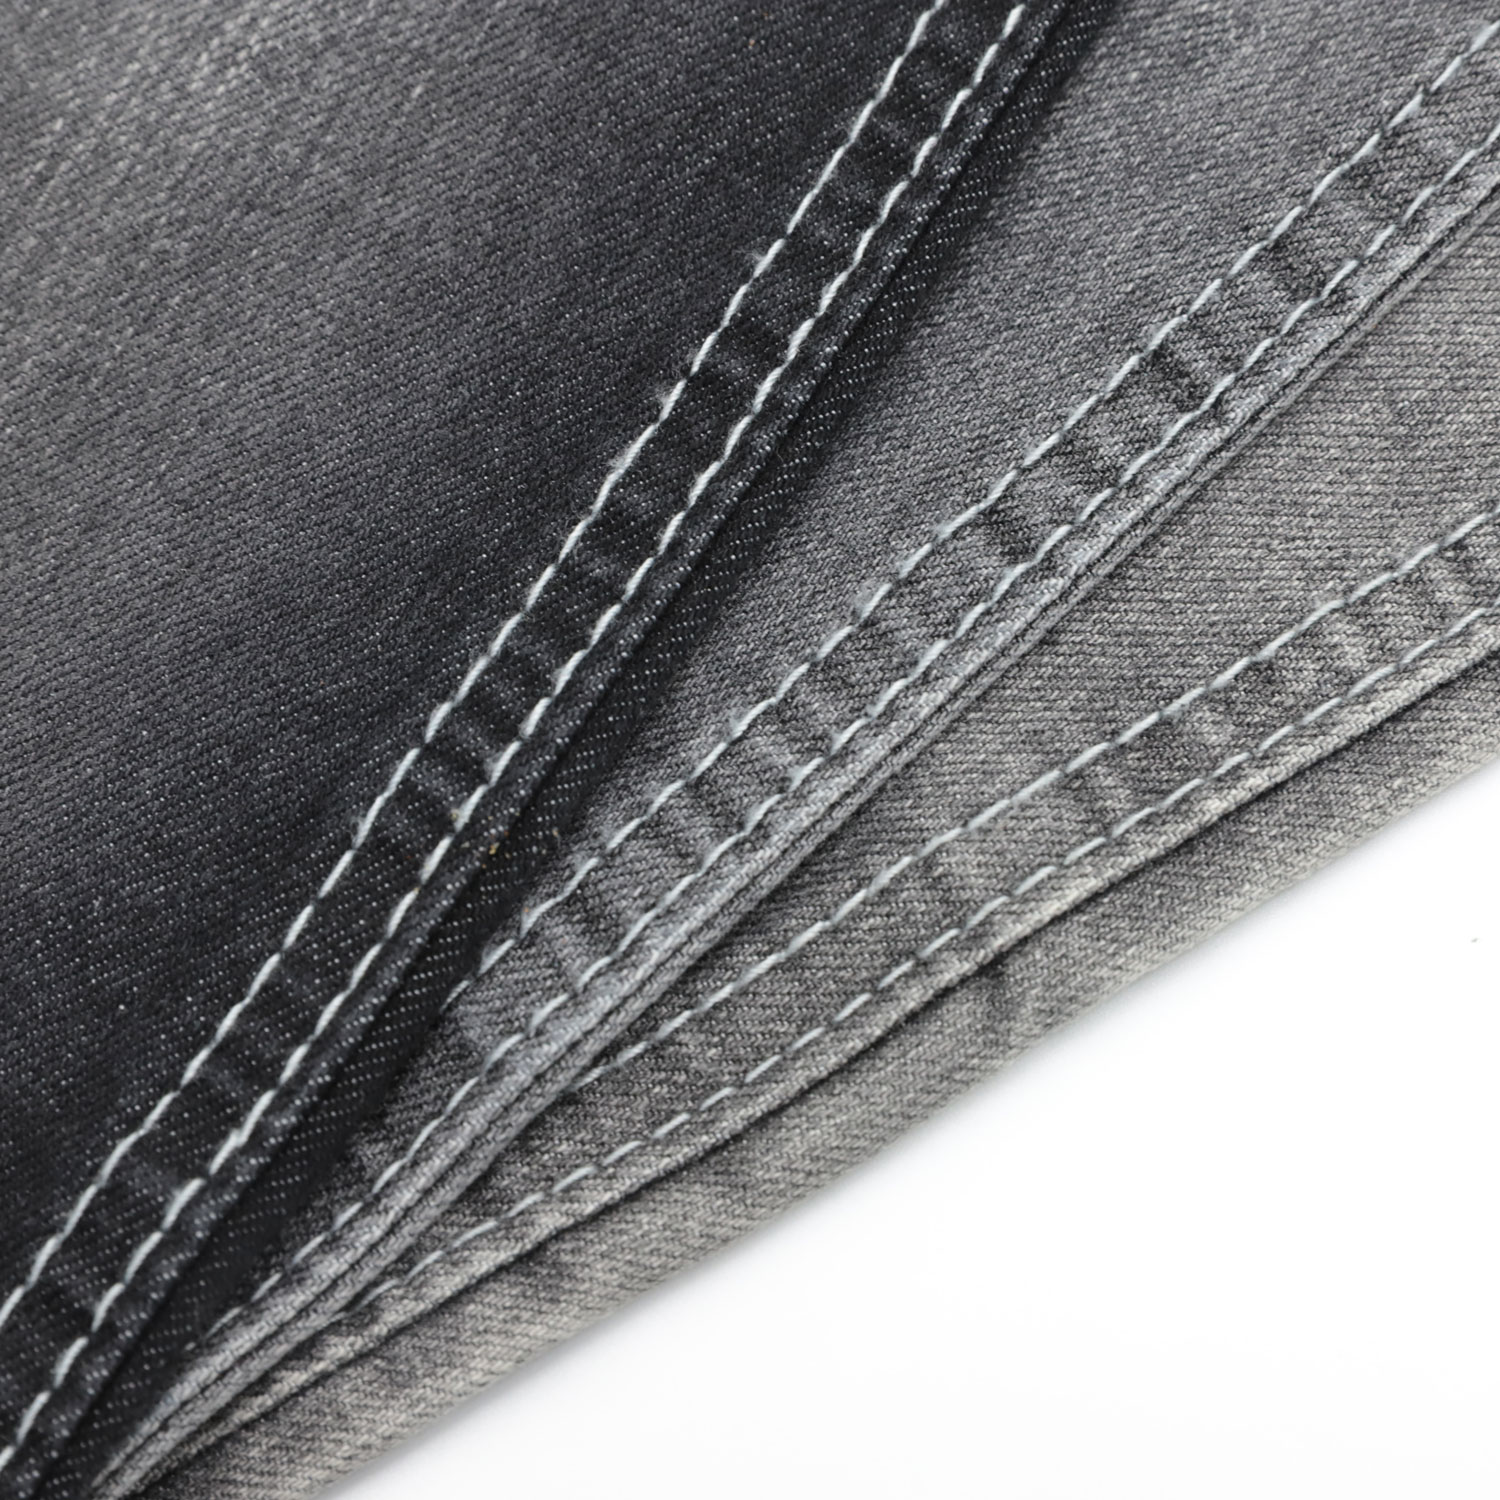 How to Wash Stretch Denim Fabric Without Shrinking 1